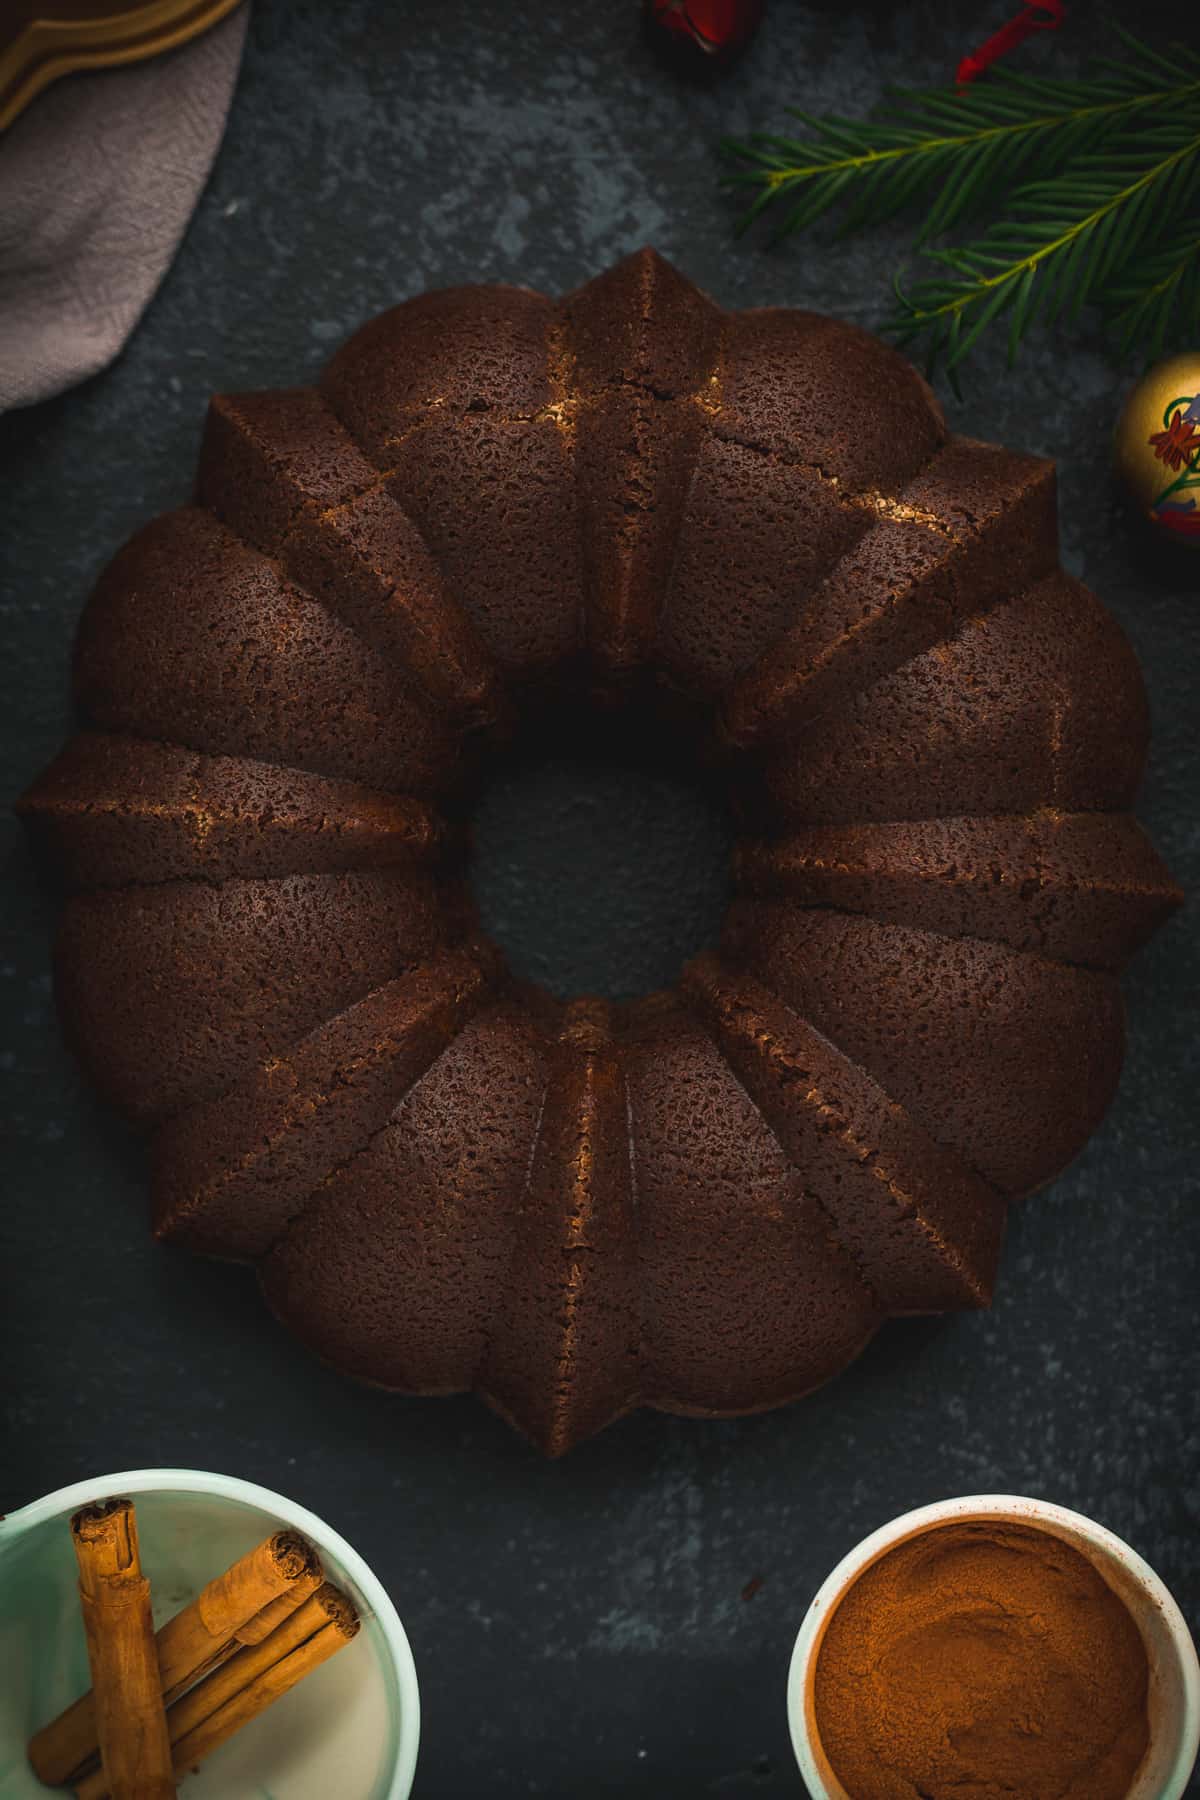 A ginger cake on a very dark background. There is a bowl of ground ginger next to it and another bowl with cinnamon sticks. 